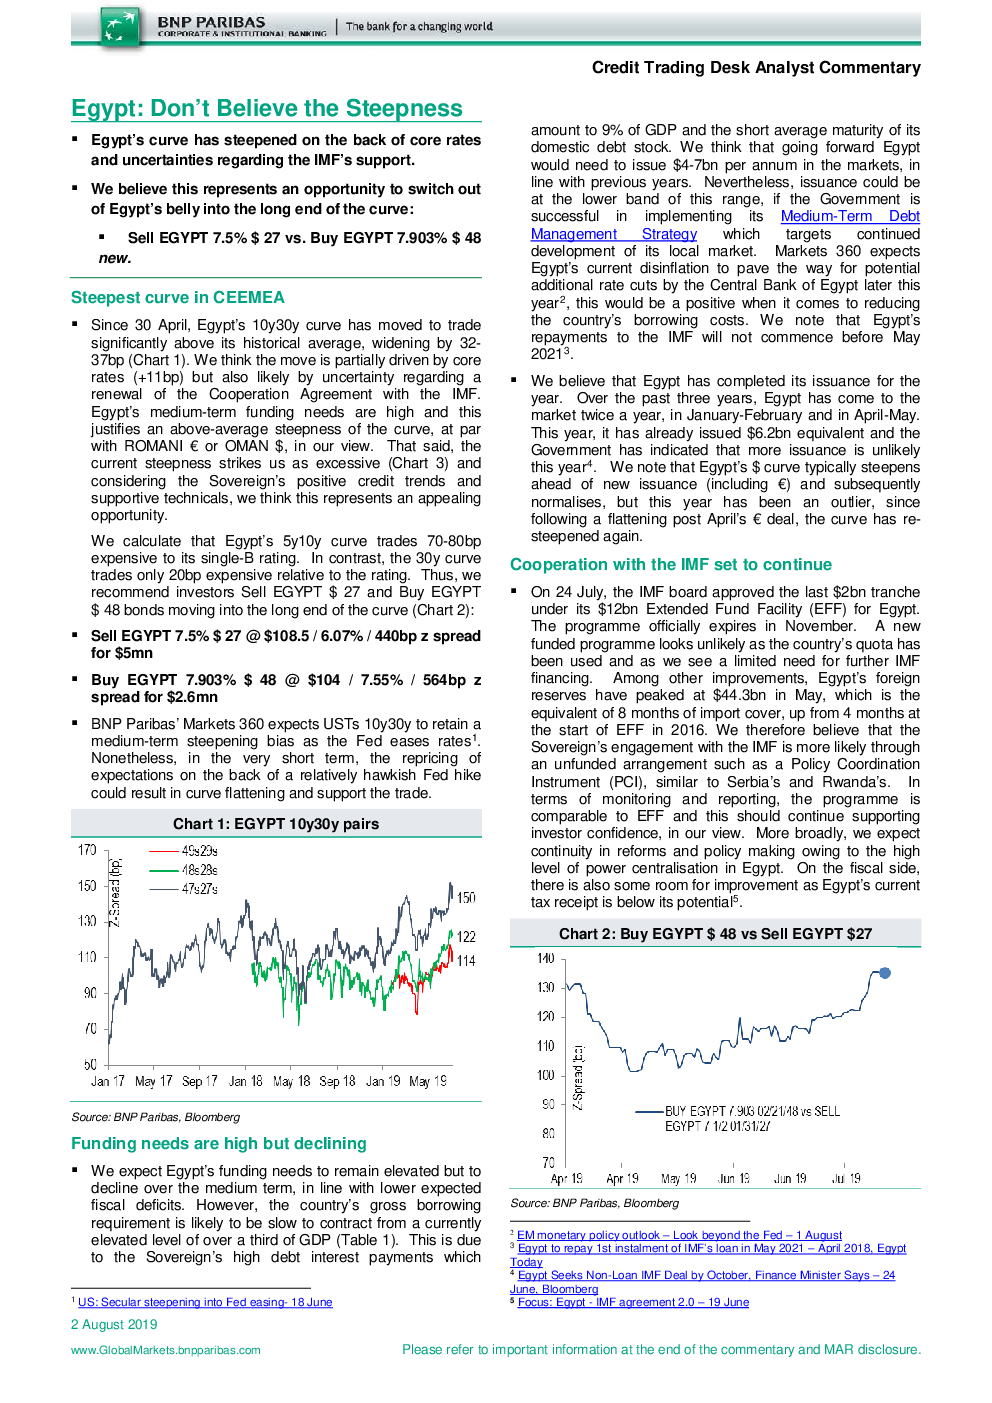 Credit Trading Desk Analyst Commentary Closing Long Italy 5y 2003